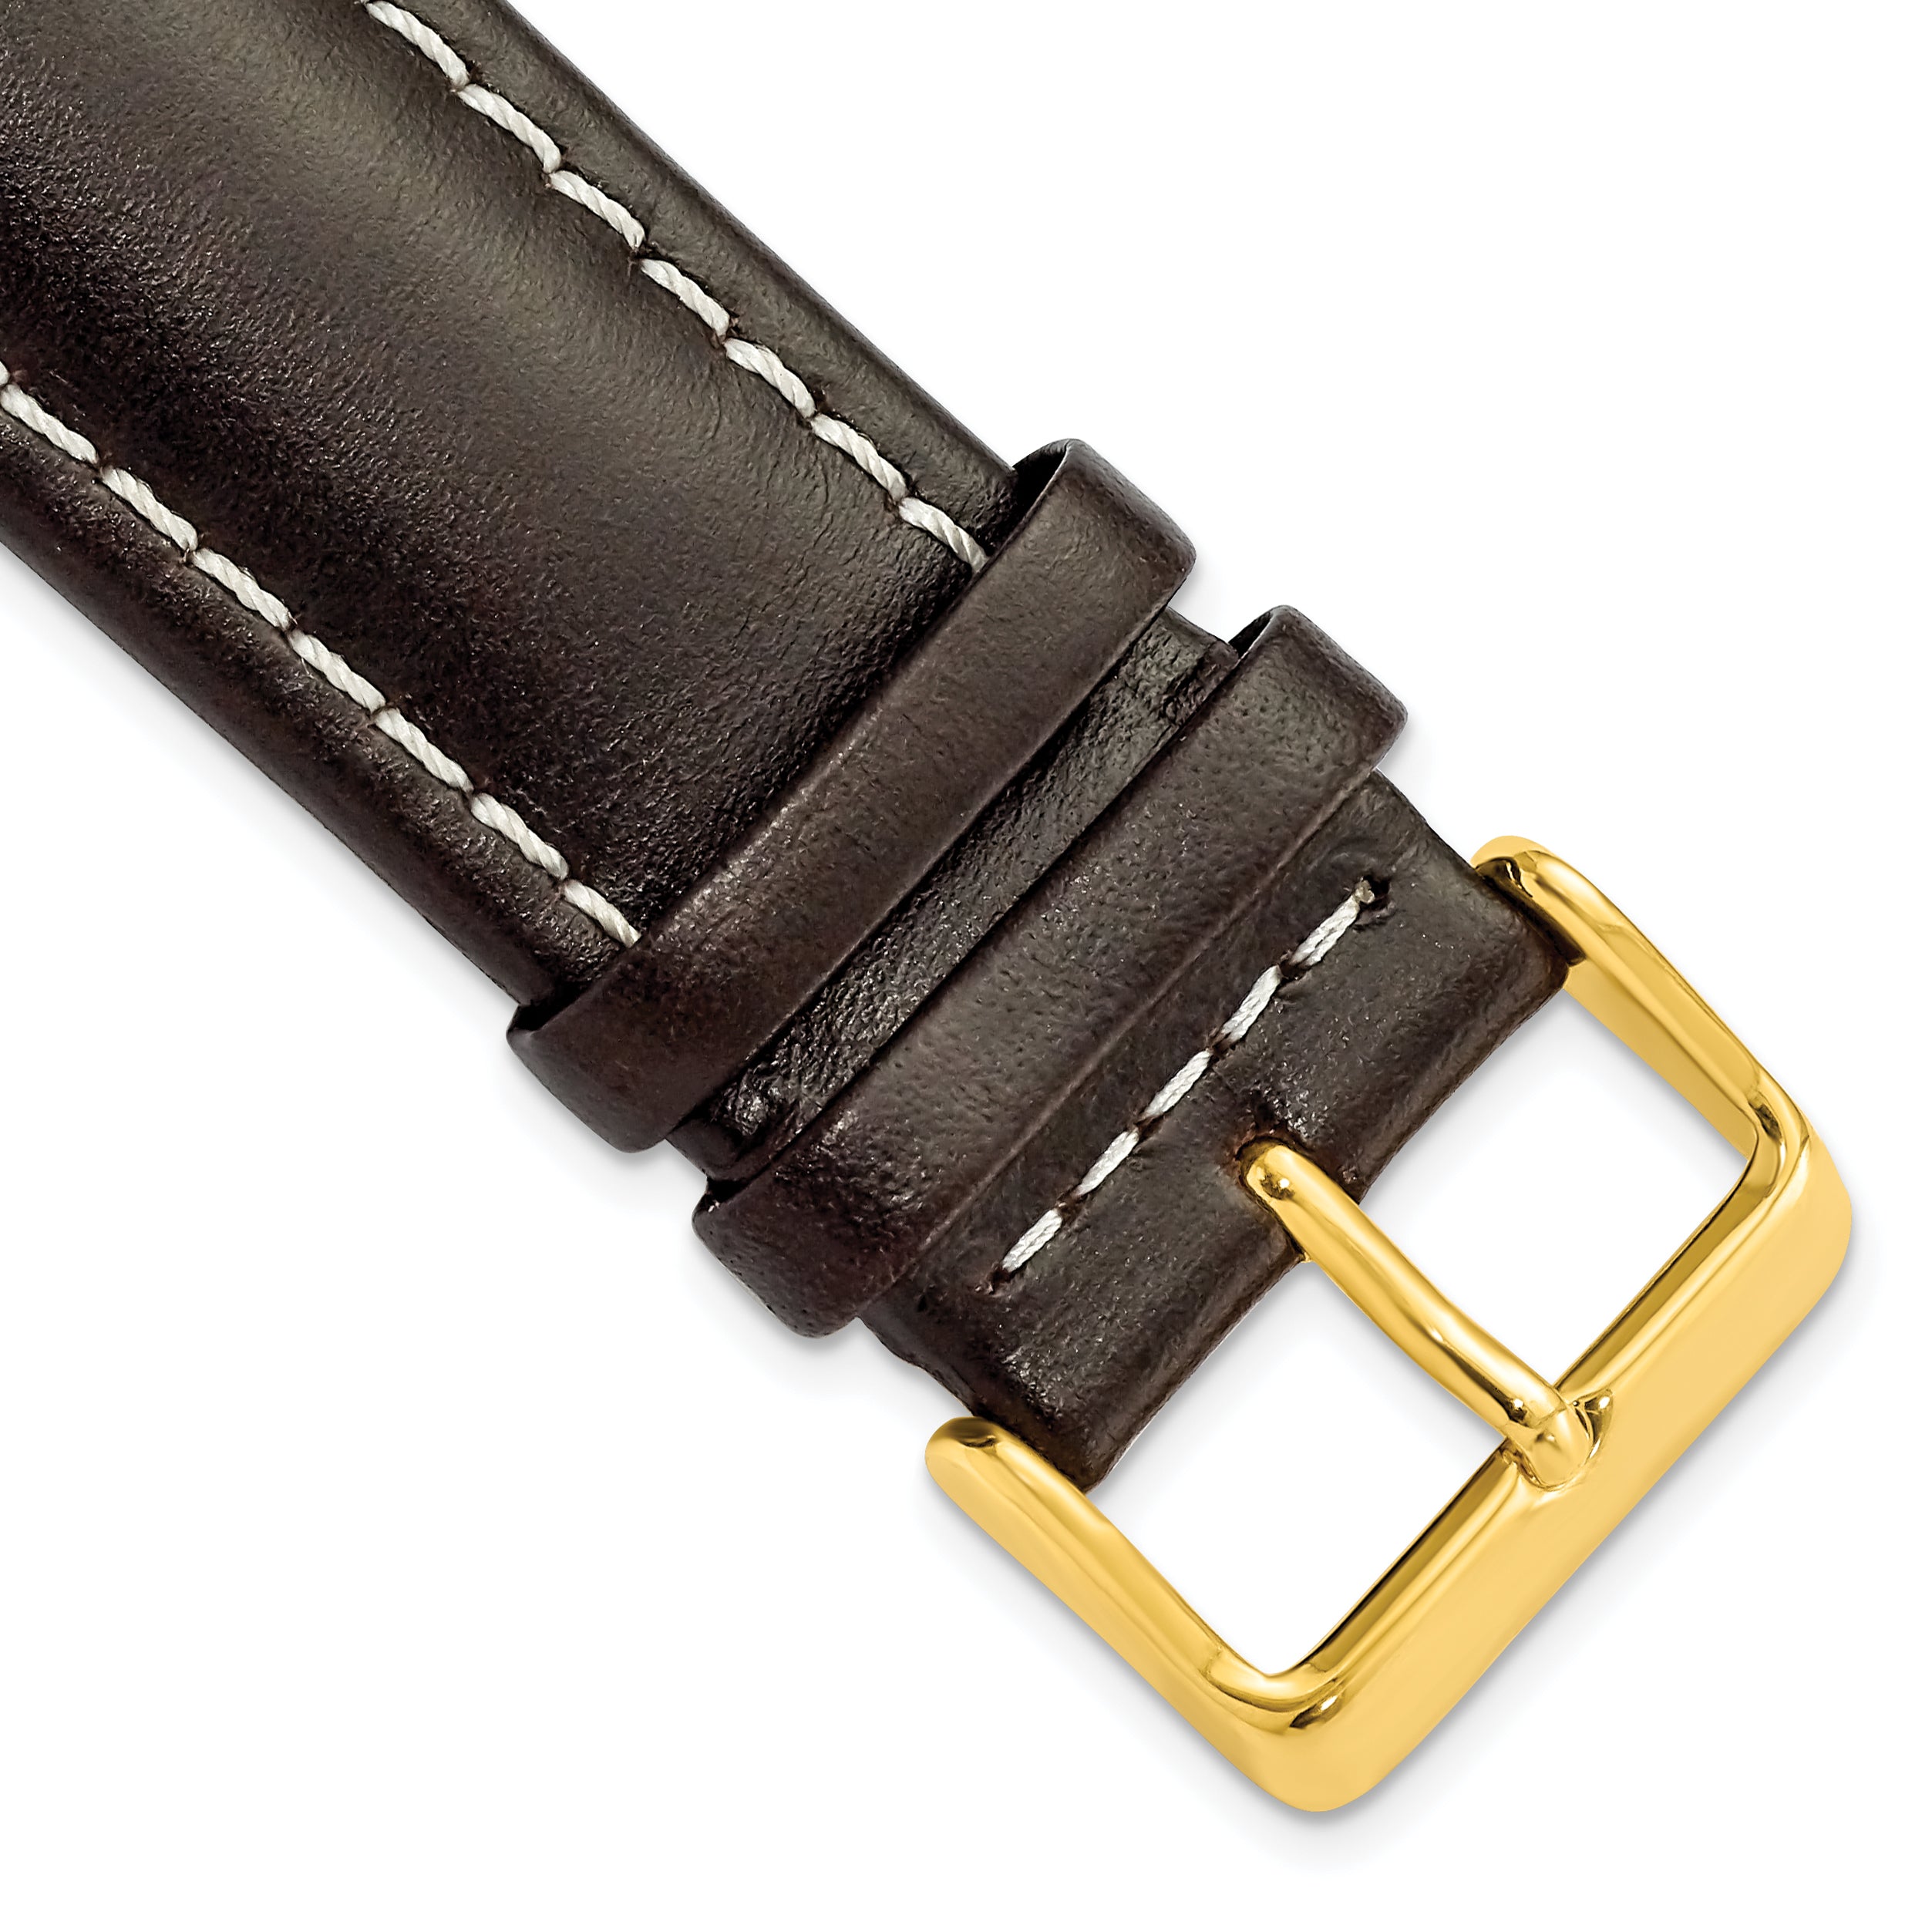 DeBeer 24mm Dark Brown Oil-tanned Leather with White Stitching and Gold-tone Buckle 7.5 inch Watch Band